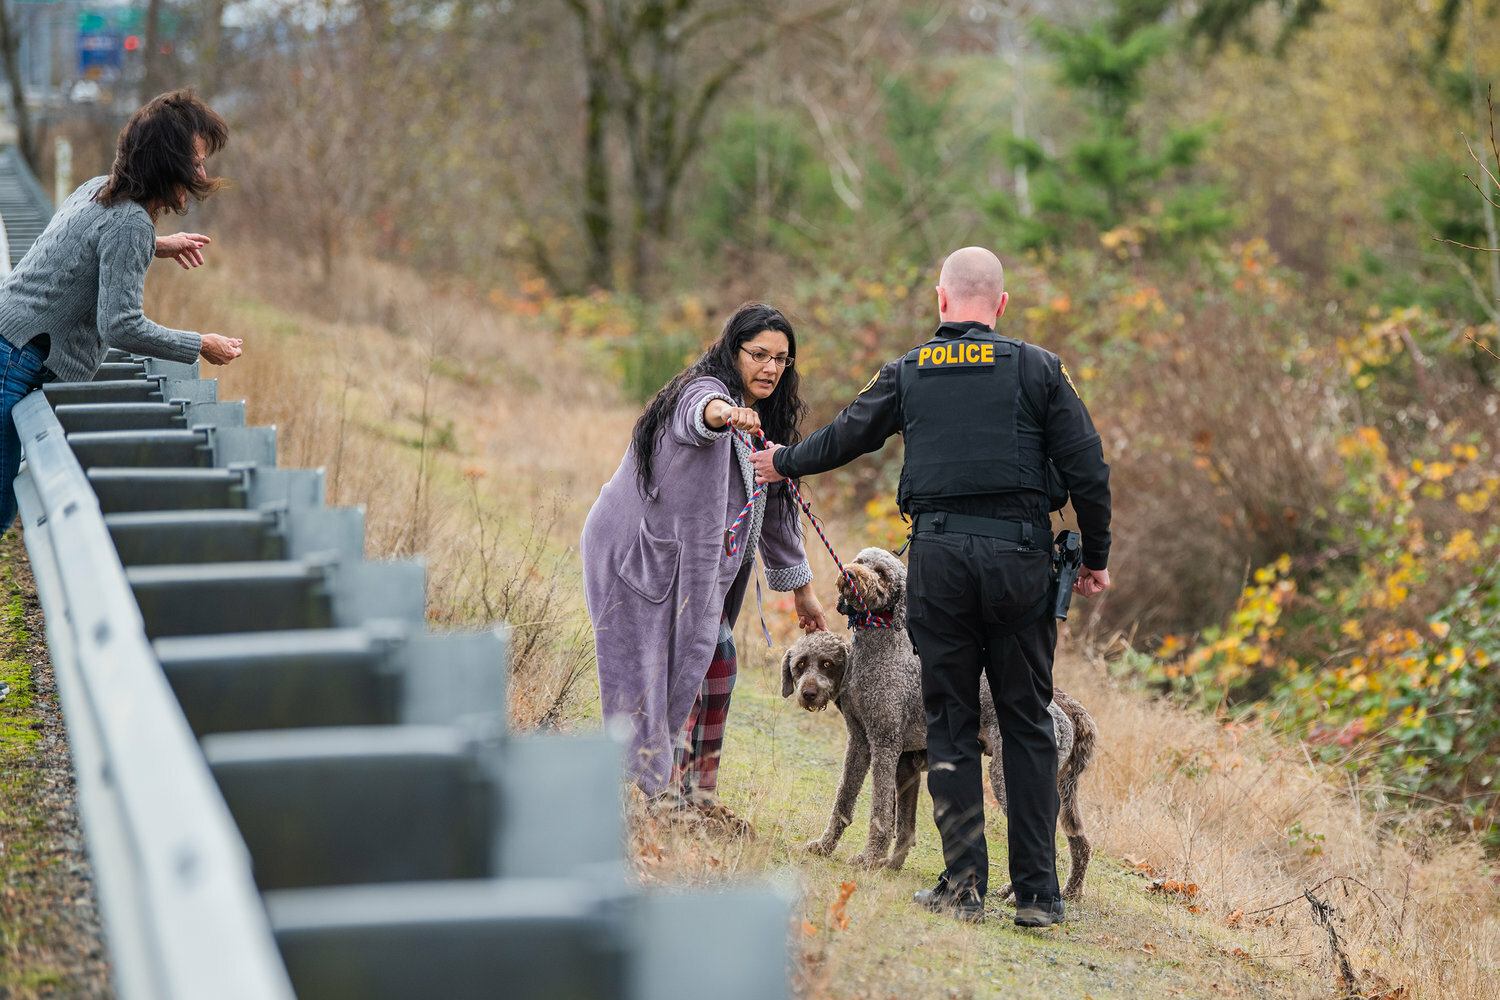 Maricruz Valencia, of Rochester, hands a leash to Officer M. King, with the Centralia Police Department, as April Thornton, of Centralia, holds treats in her hand for Buddy and Spike, two poodle-crosses who left their property along Russell Road in Centralia before walking through traffic near Interstate 5 in December 2022.